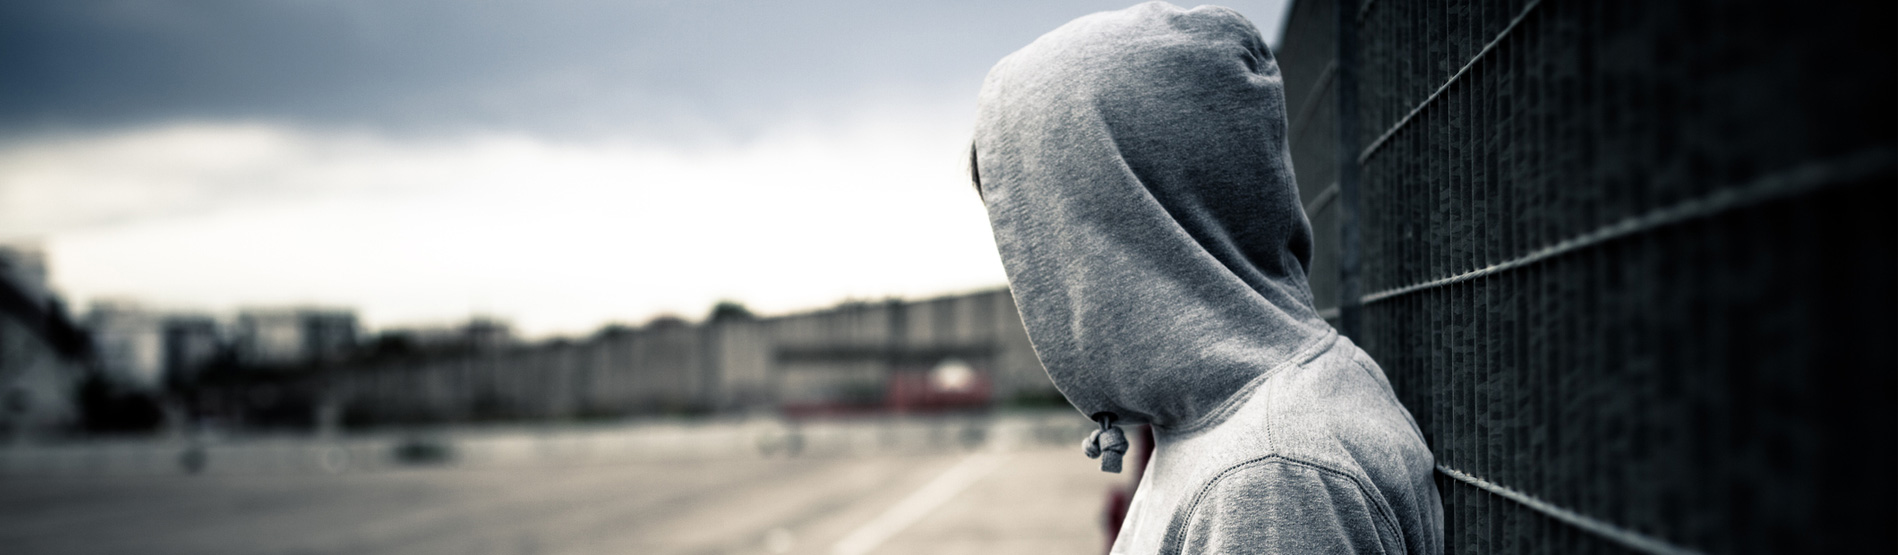 Image of young person wearing hoodie